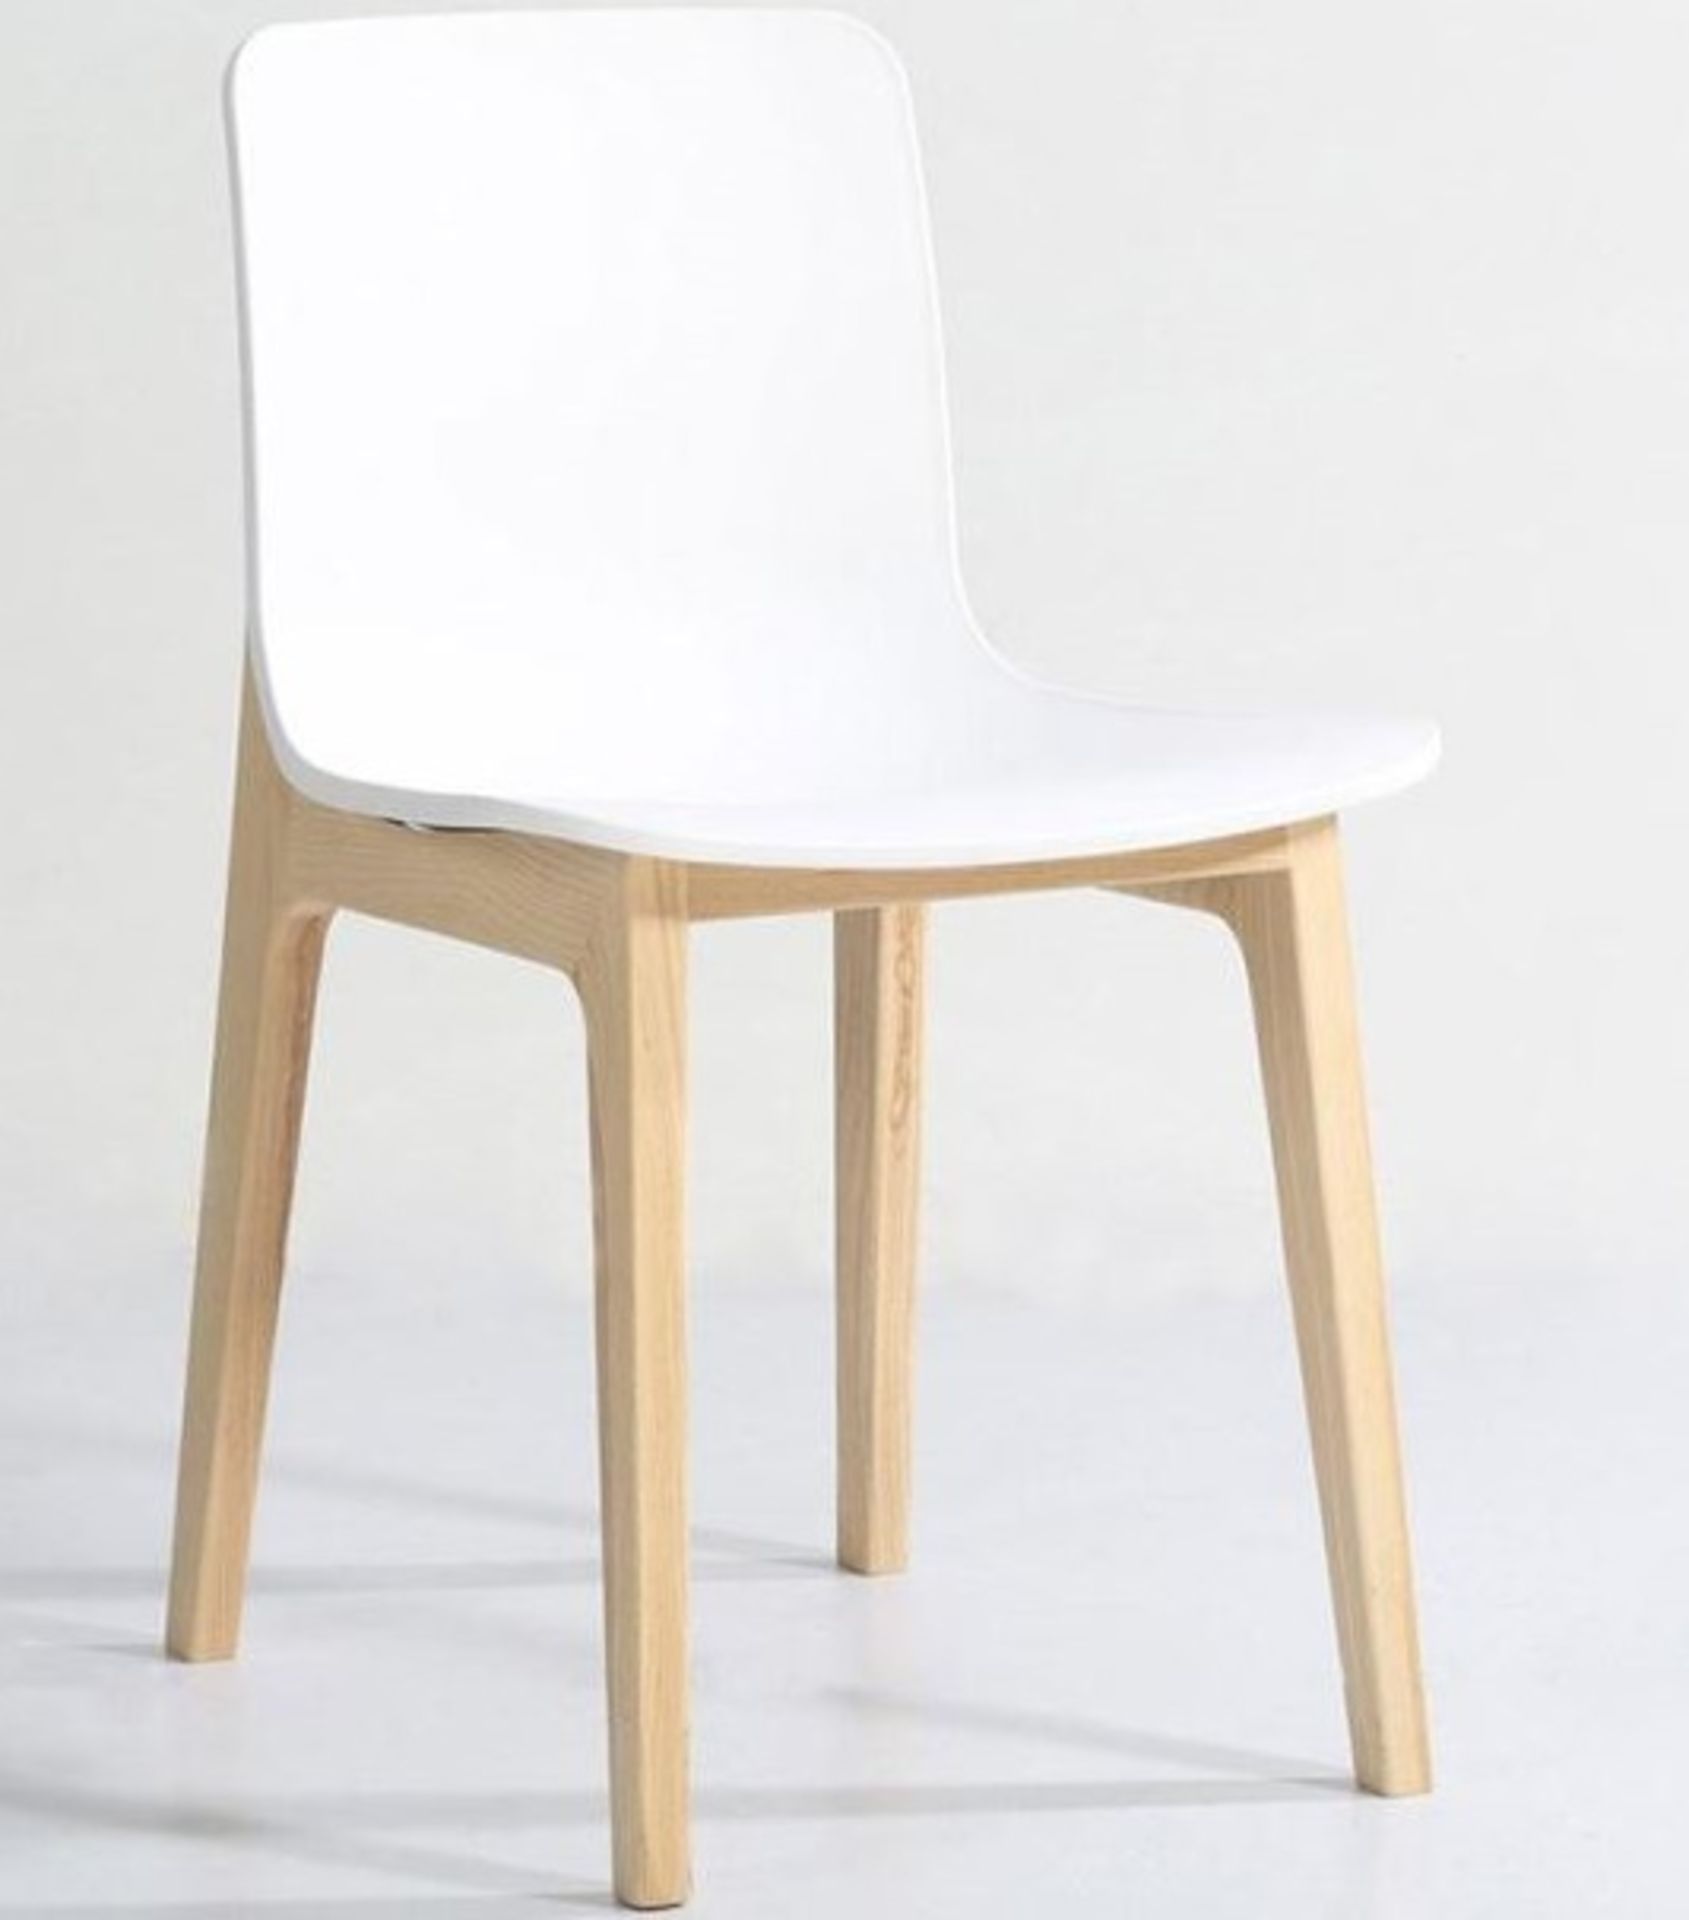 Set of 4 x Swift DC-782W Dining Chairs With White ABS Seats and Light Wood Bases - Dimensions H75